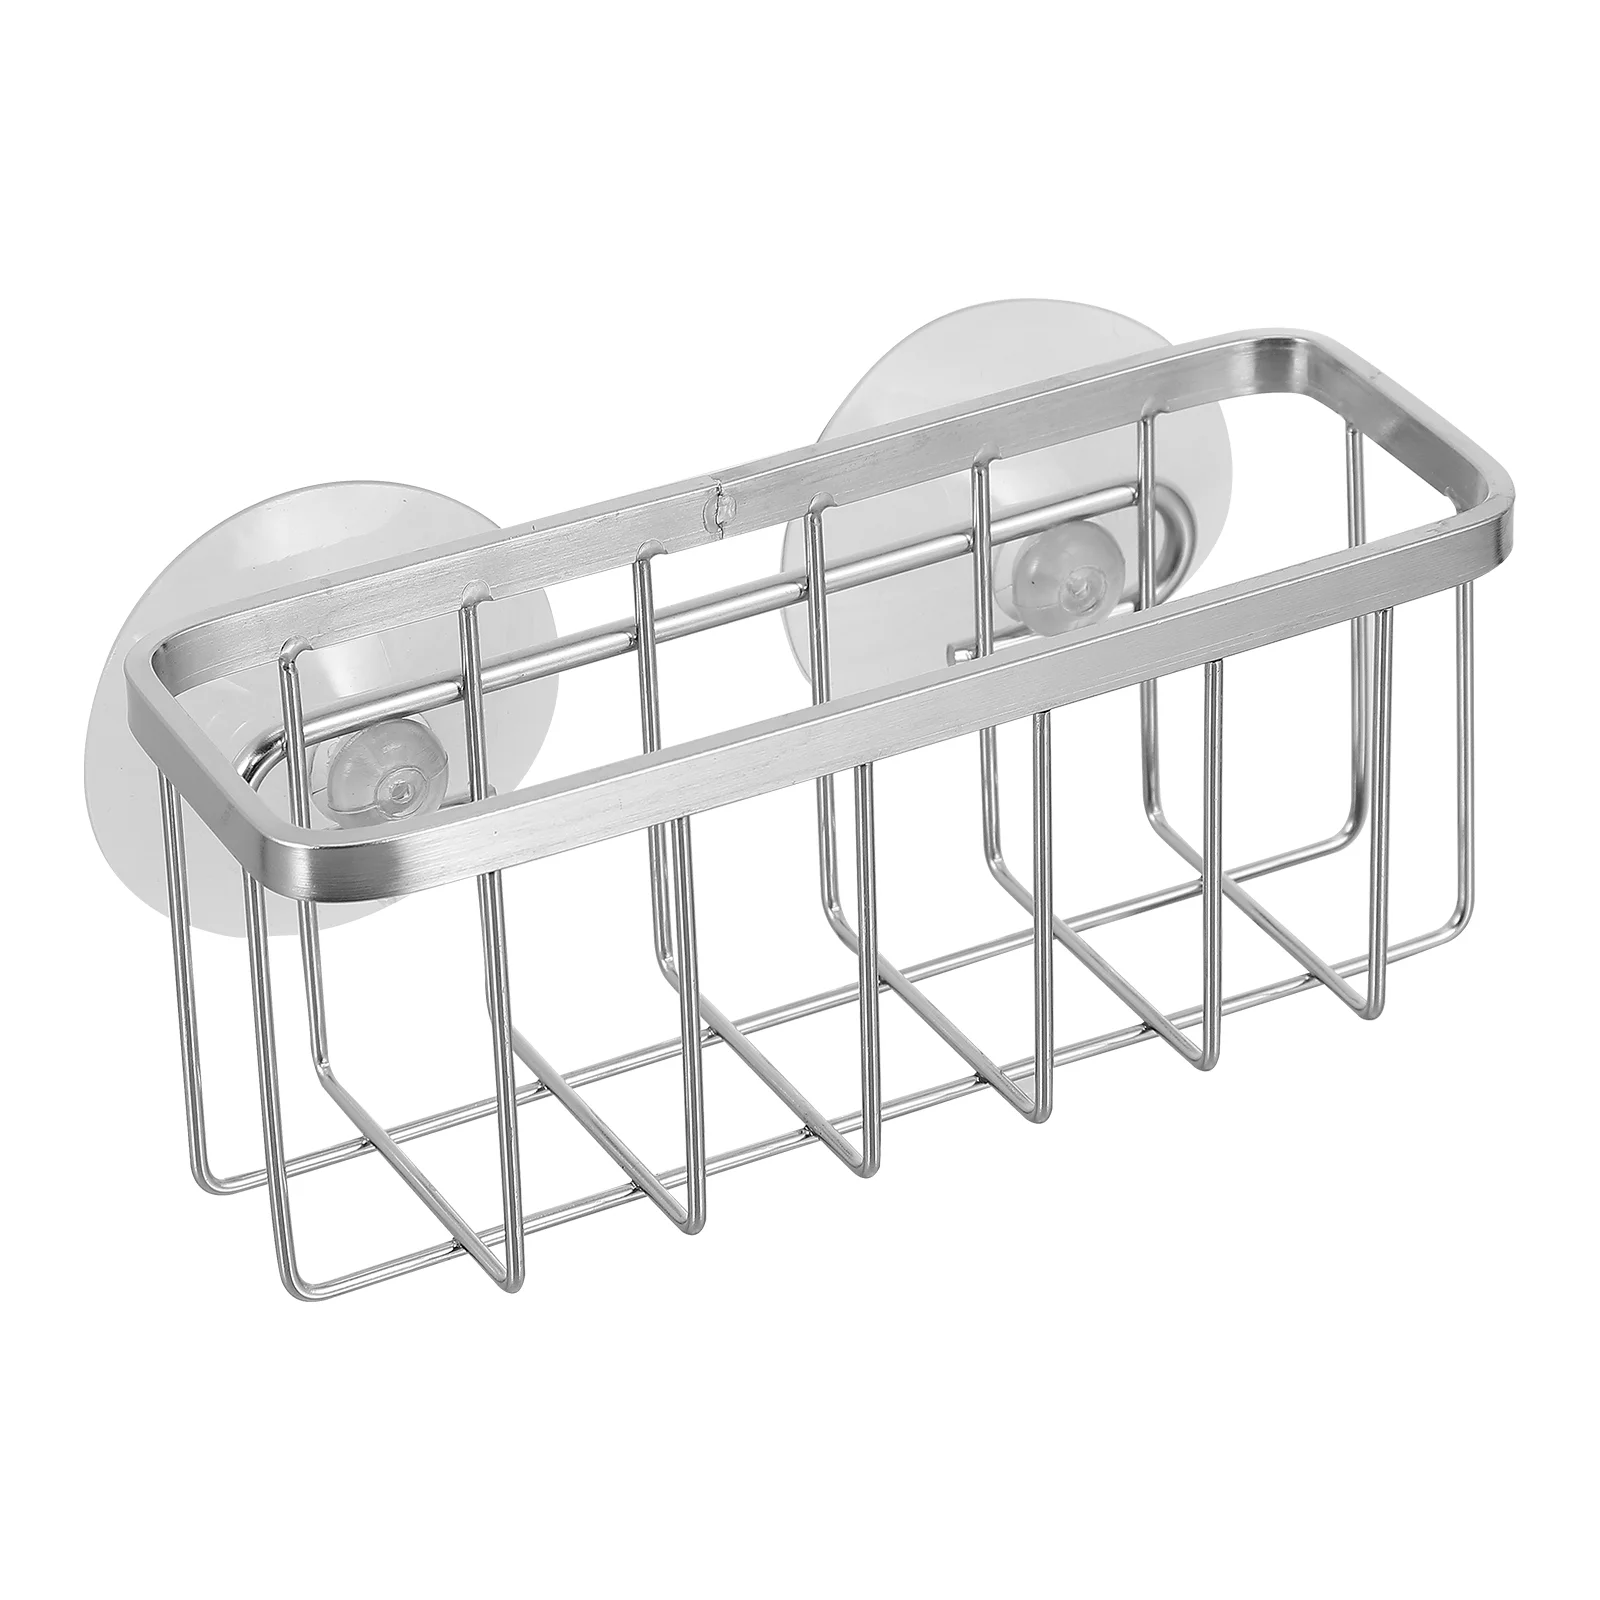 

Shelf Supports Sponge Drainer Kitchen Drying Rack Sink Stainless Steel Holder Suction Cup Storage